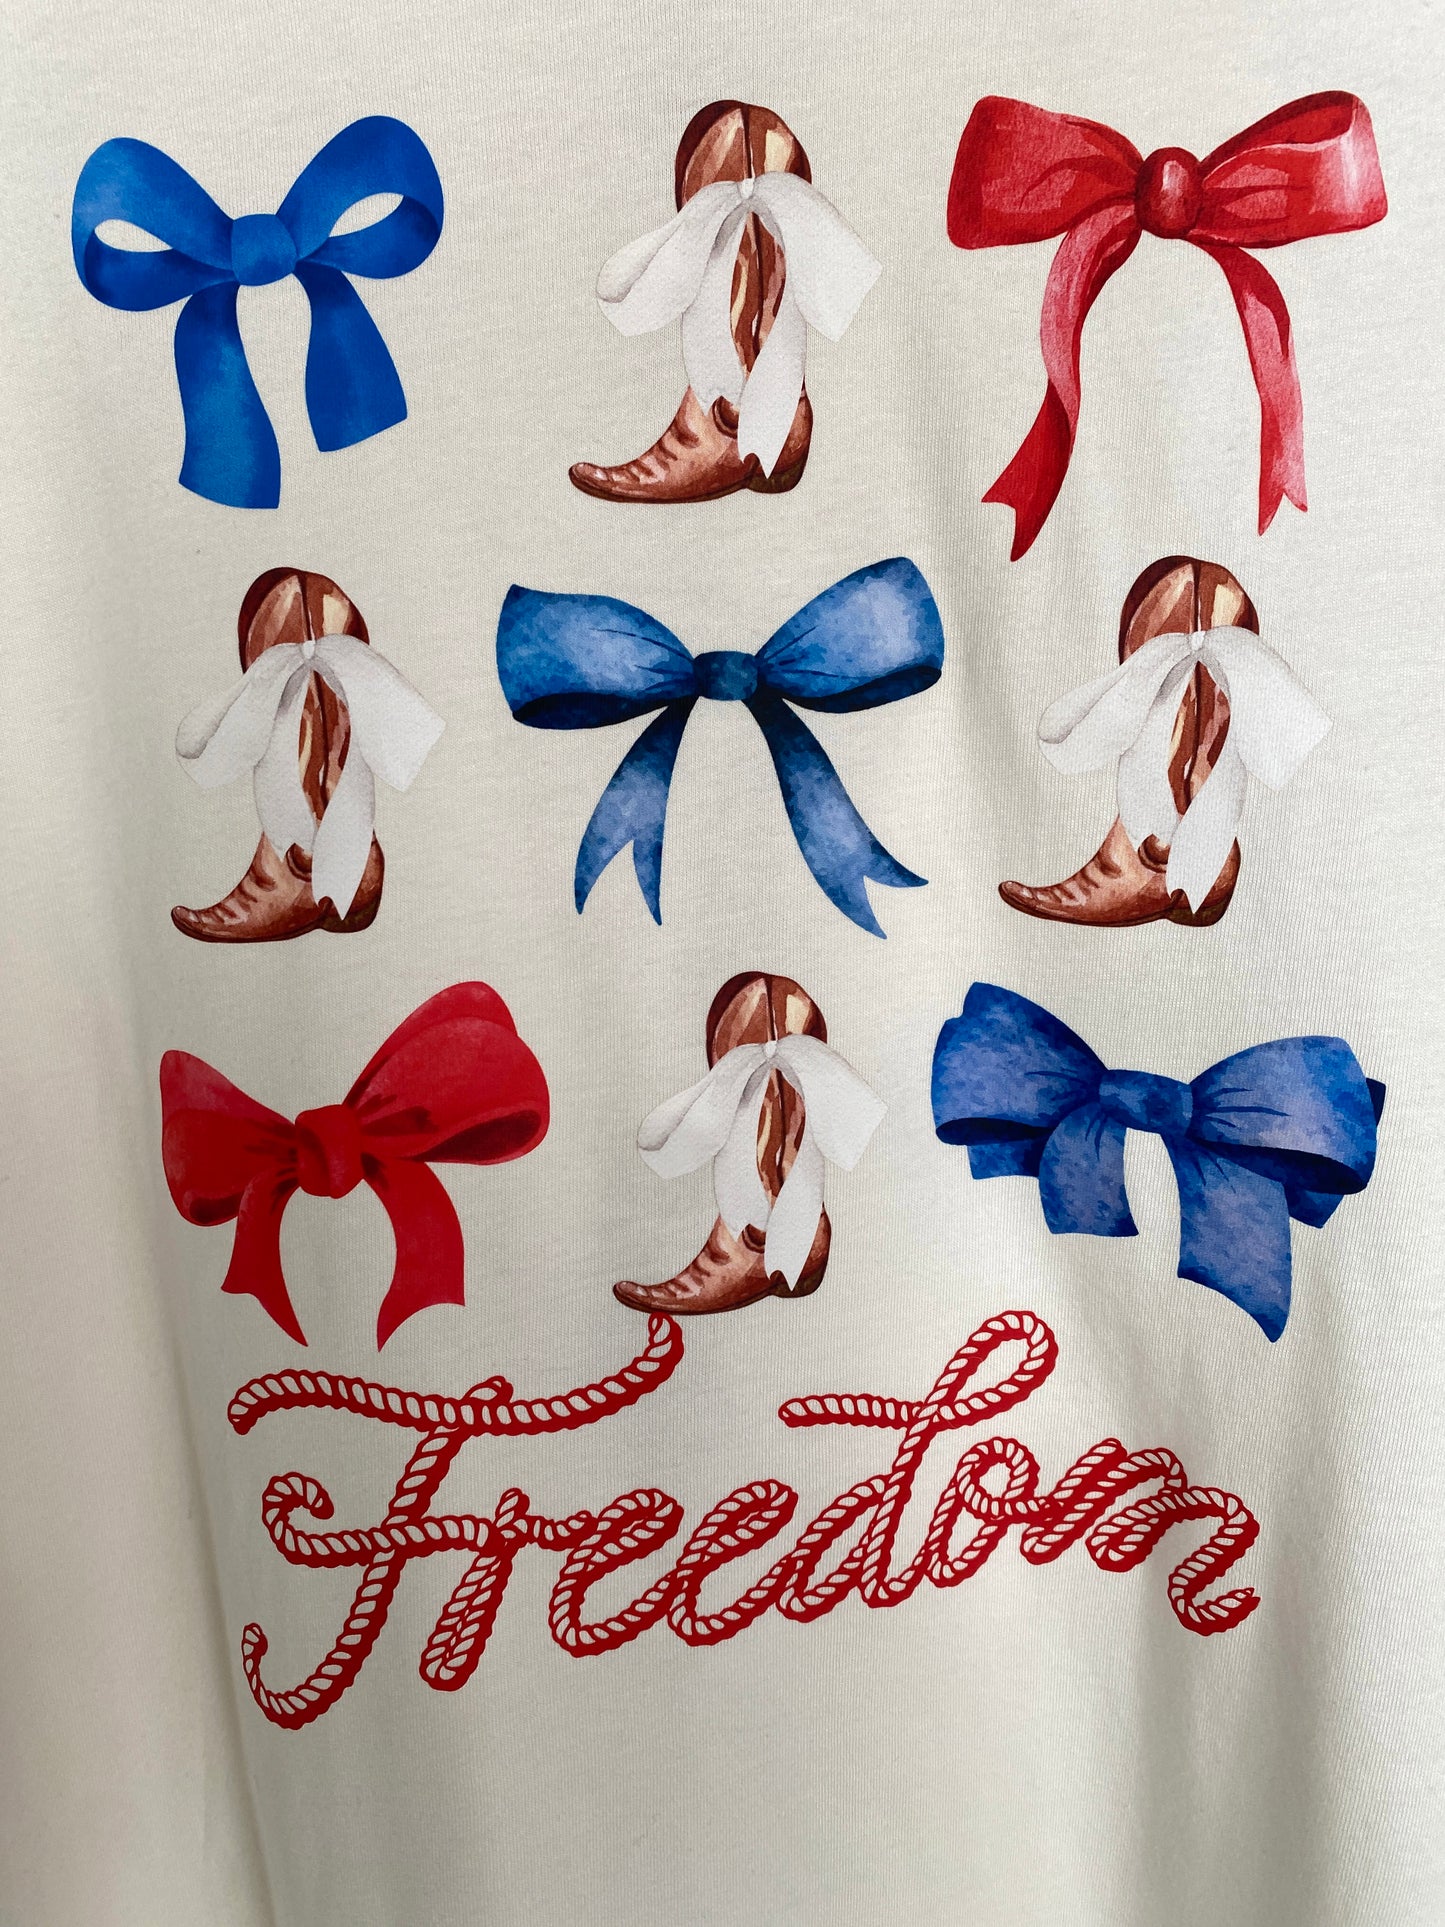 Bows, Boots, & Freedom Graphic Tee - Vintage White